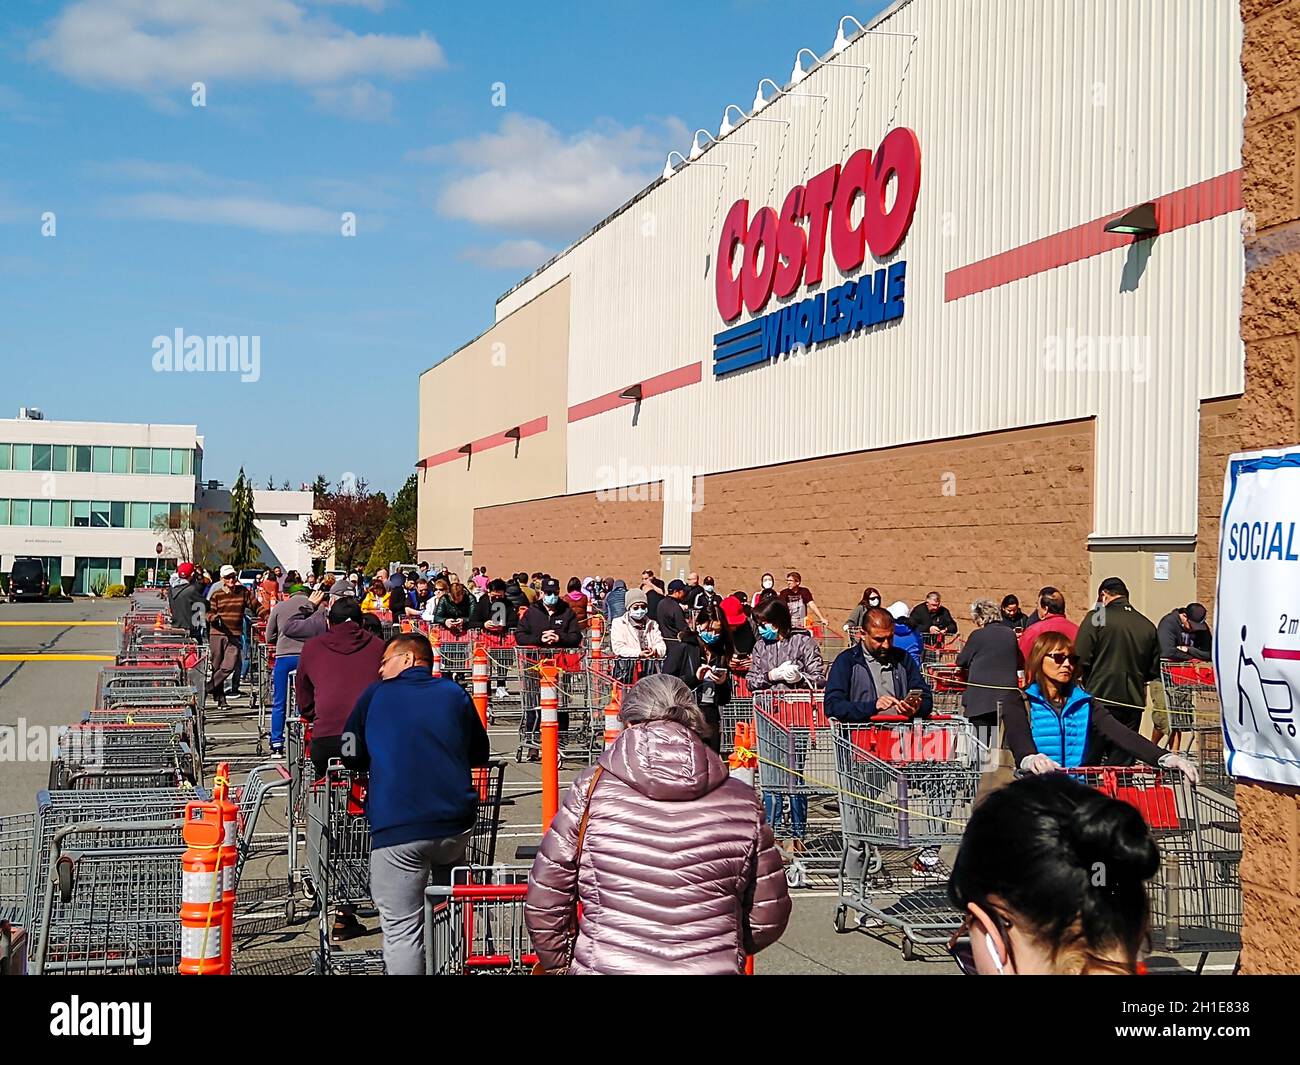 LANGLEY, CANADA - April 14, 2020. Shoppers line up at costco, in the second half of the line, to get into the store during Covid-19 on April 14, 2020. Stock Photo